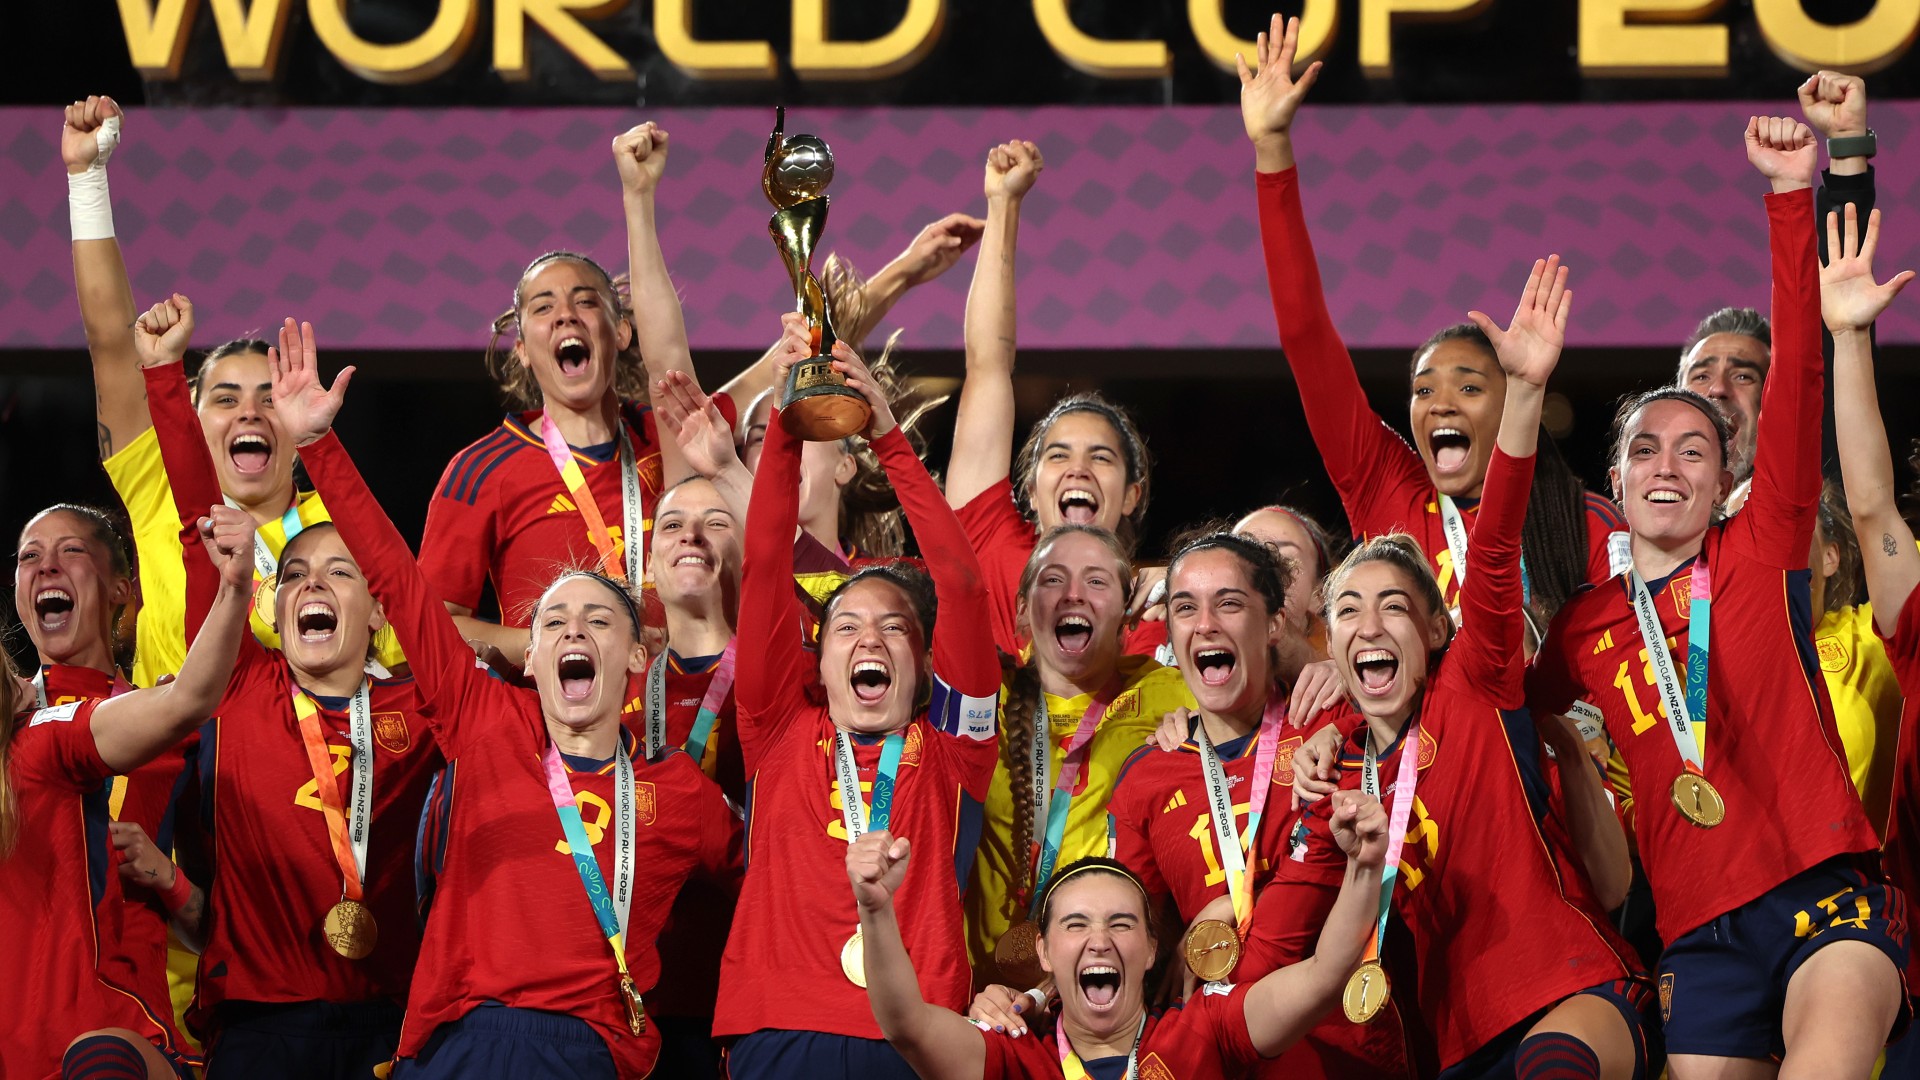 Women's World Cup heading to Brazil